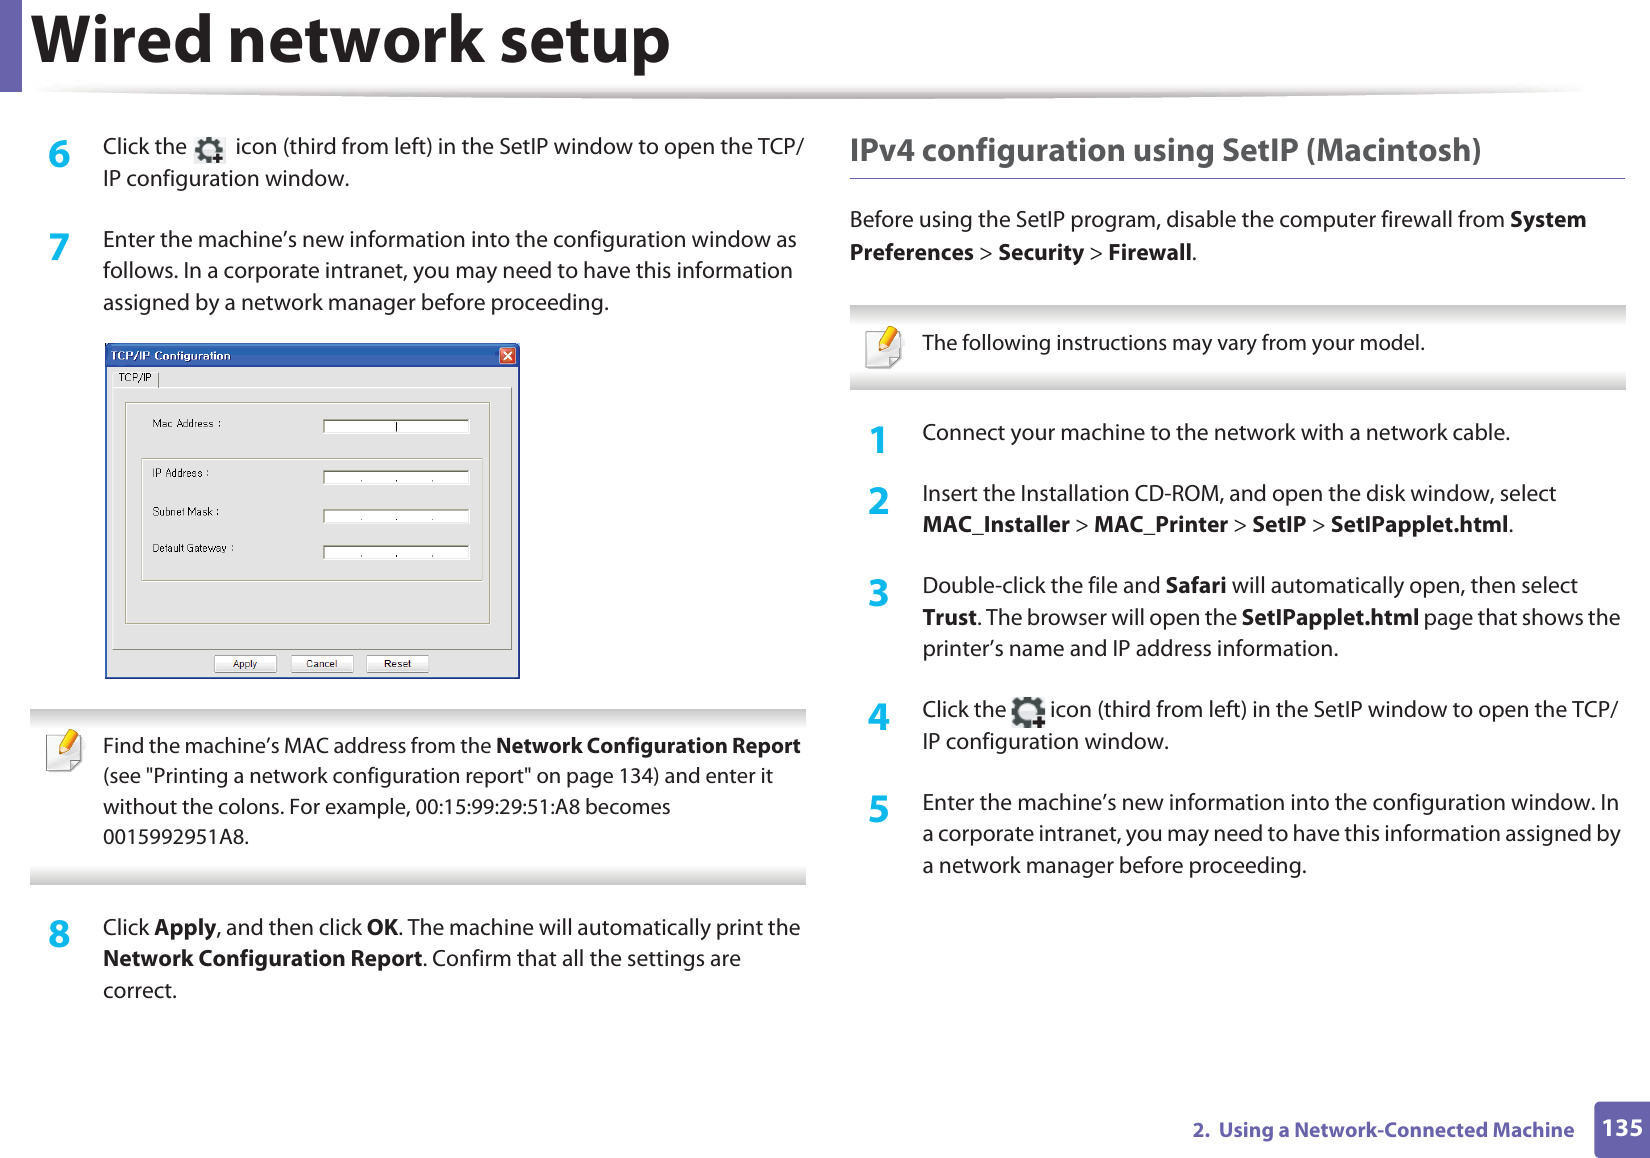 Wired network setup1352.  Using a Network-Connected Machine6  Click the   icon (third from left) in the SetIP window to open the TCP/IP configuration window.7  Enter the machine’s new information into the configuration window as follows. In a corporate intranet, you may need to have this information assigned by a network manager before proceeding. Find the machine’s MAC address from the Network Configuration Report (see &quot;Printing a network configuration report&quot; on page 134) and enter it without the colons. For example, 00:15:99:29:51:A8 becomes 0015992951A8. 8  Click Apply, and then click OK. The machine will automatically print the Network Configuration Report. Confirm that all the settings are correct.IPv4 configuration using SetIP (Macintosh)Before using the SetIP program, disable the computer firewall from System Preferences &gt; Security &gt; Firewall. The following instructions may vary from your model. 1Connect your machine to the network with a network cable.2  Insert the Installation CD-ROM, and open the disk window, select MAC_Installer &gt; MAC_Printer &gt; SetIP &gt; SetIPapplet.html.3  Double-click the file and Safari will automatically open, then select Trust. The browser will open the SetIPapplet.html page that shows the printer’s name and IP address information. 4  Click the   icon (third from left) in the SetIP window to open the TCP/IP configuration window.5  Enter the machine’s new information into the configuration window. In a corporate intranet, you may need to have this information assigned by a network manager before proceeding.